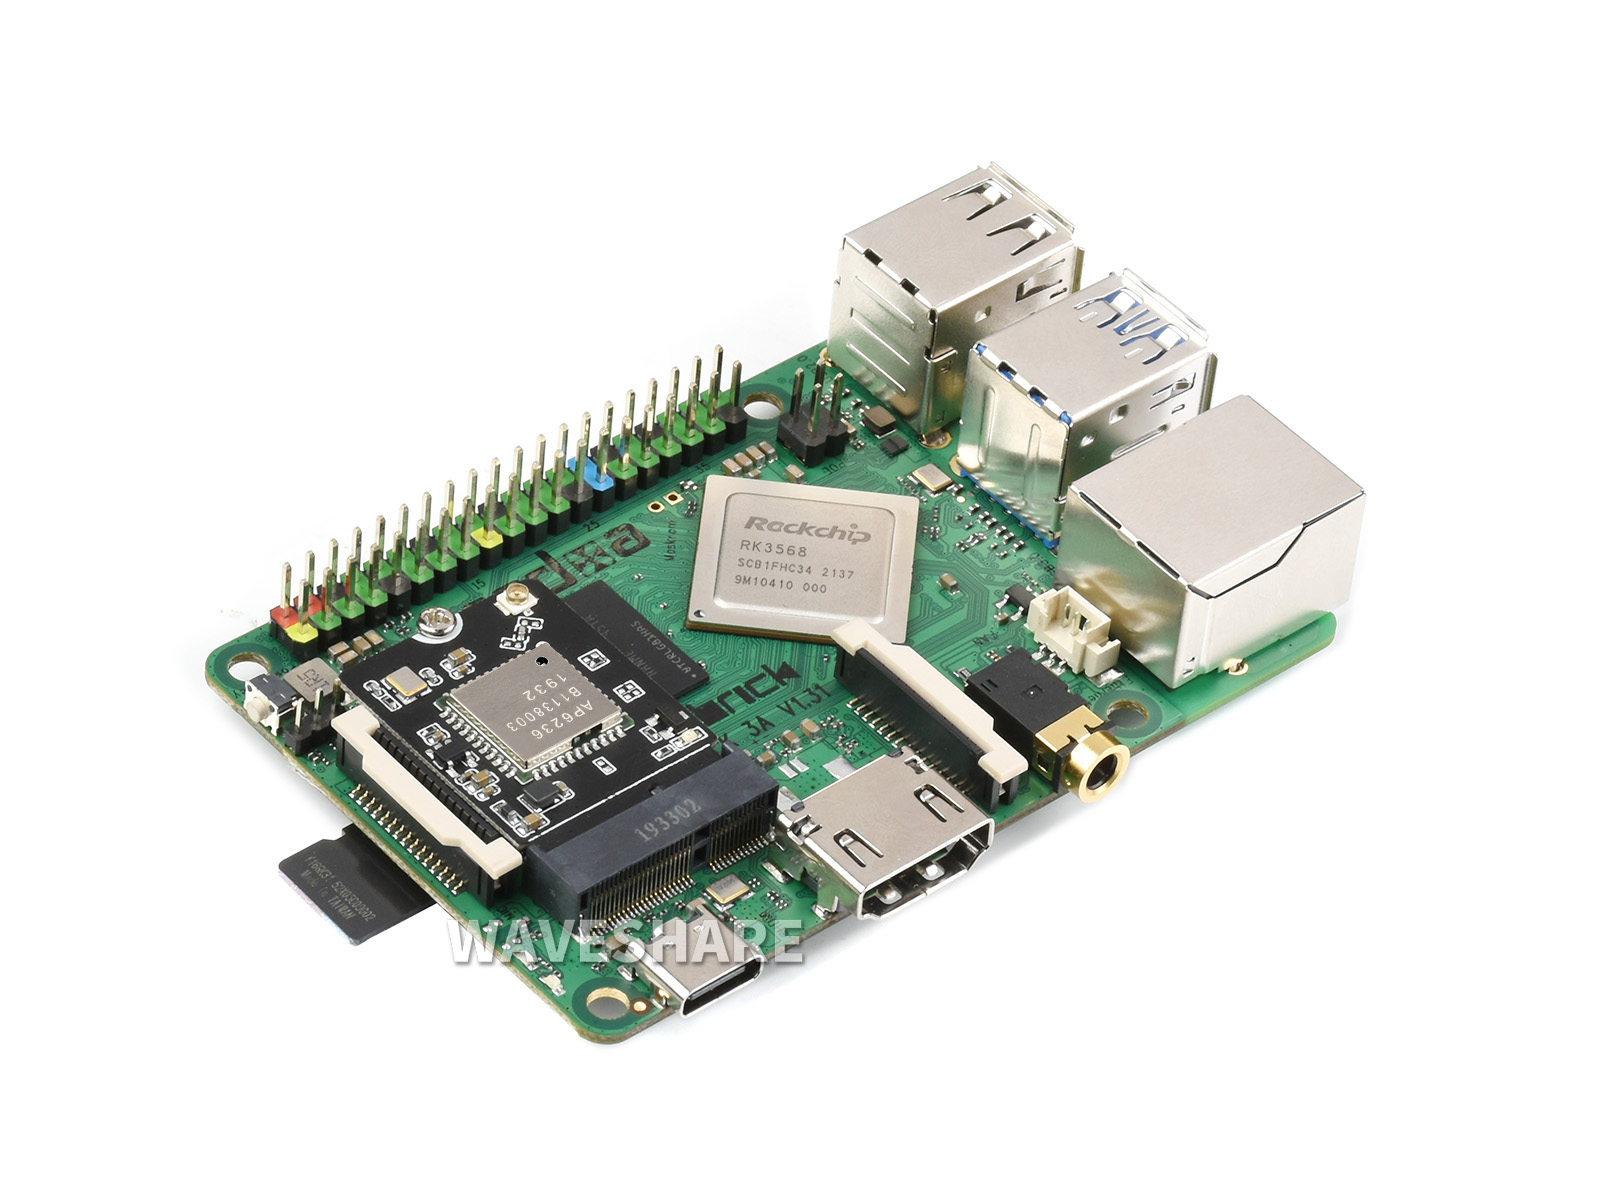 ROCK3 Model A, Credit Card Sized Computer SBC, Based On 